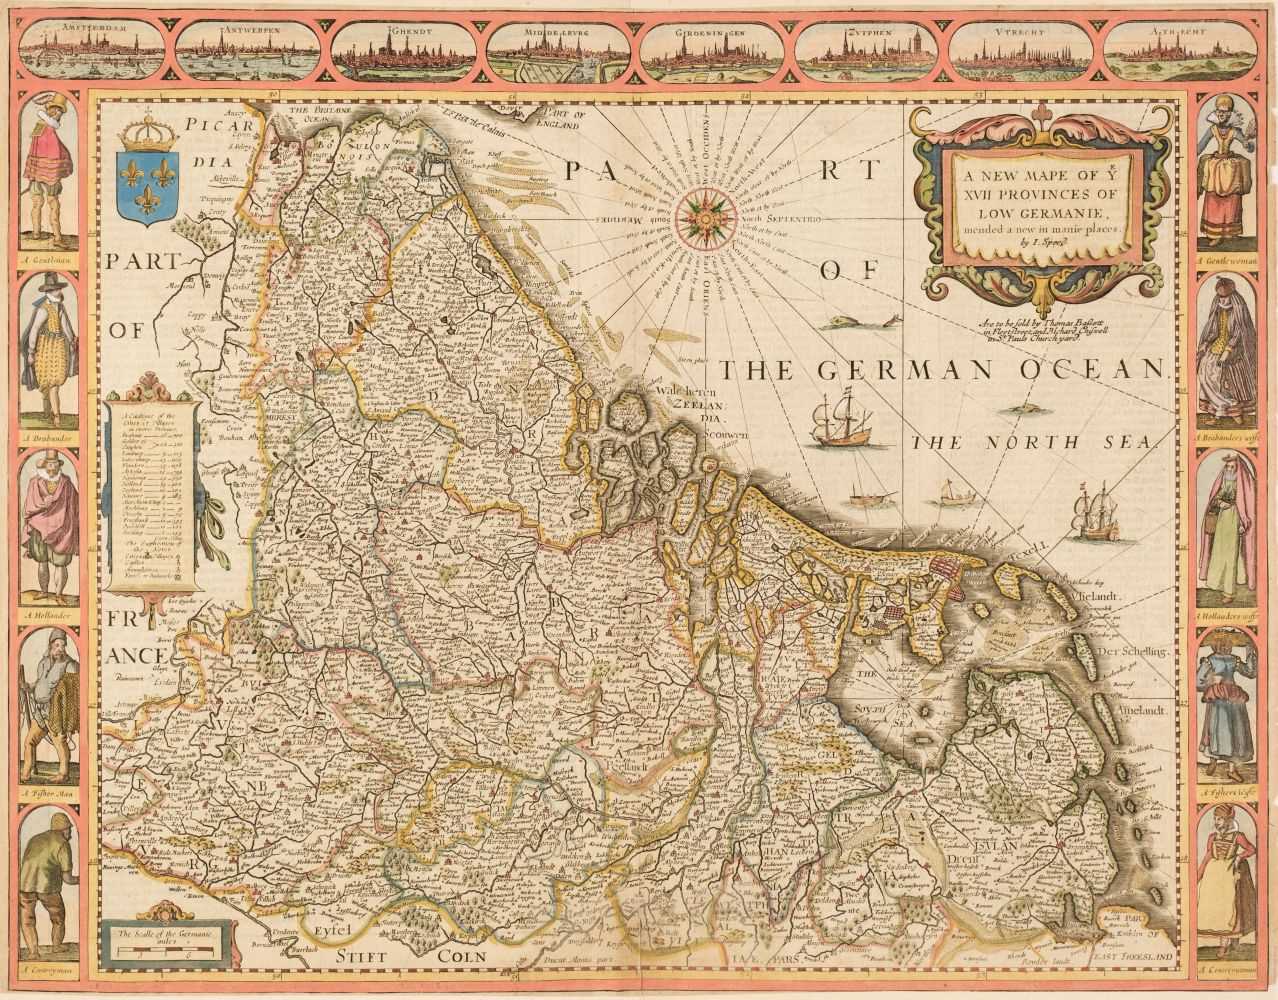 Lot 117 - Low Countries. Speed (John), A New Mape of ye XVII Provinces of Low Germanie..., 1676